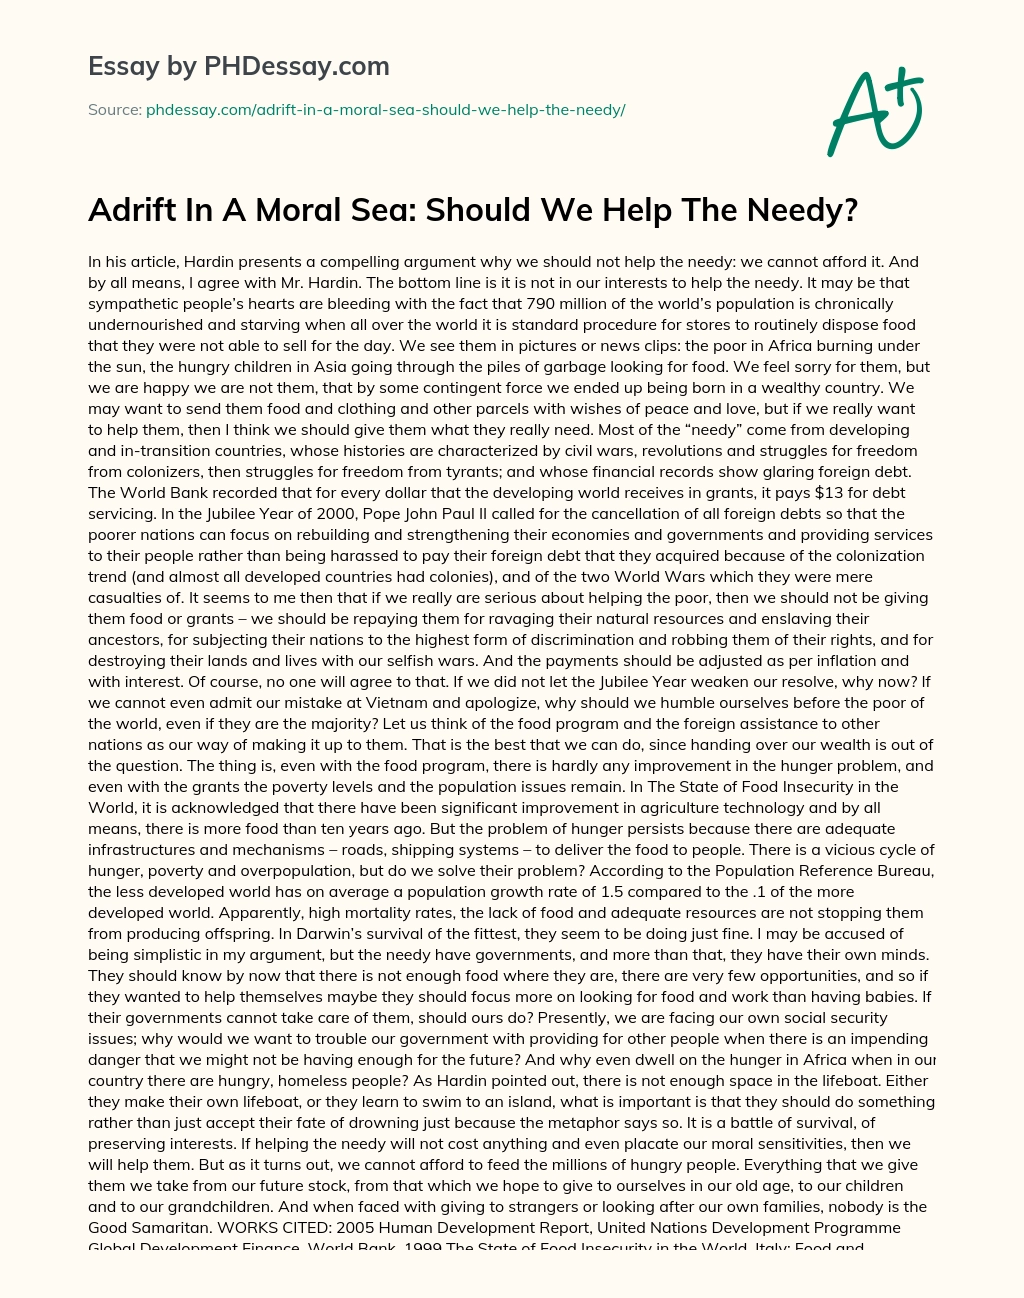 Adrift In A Moral Sea: Should We Help The Needy? essay